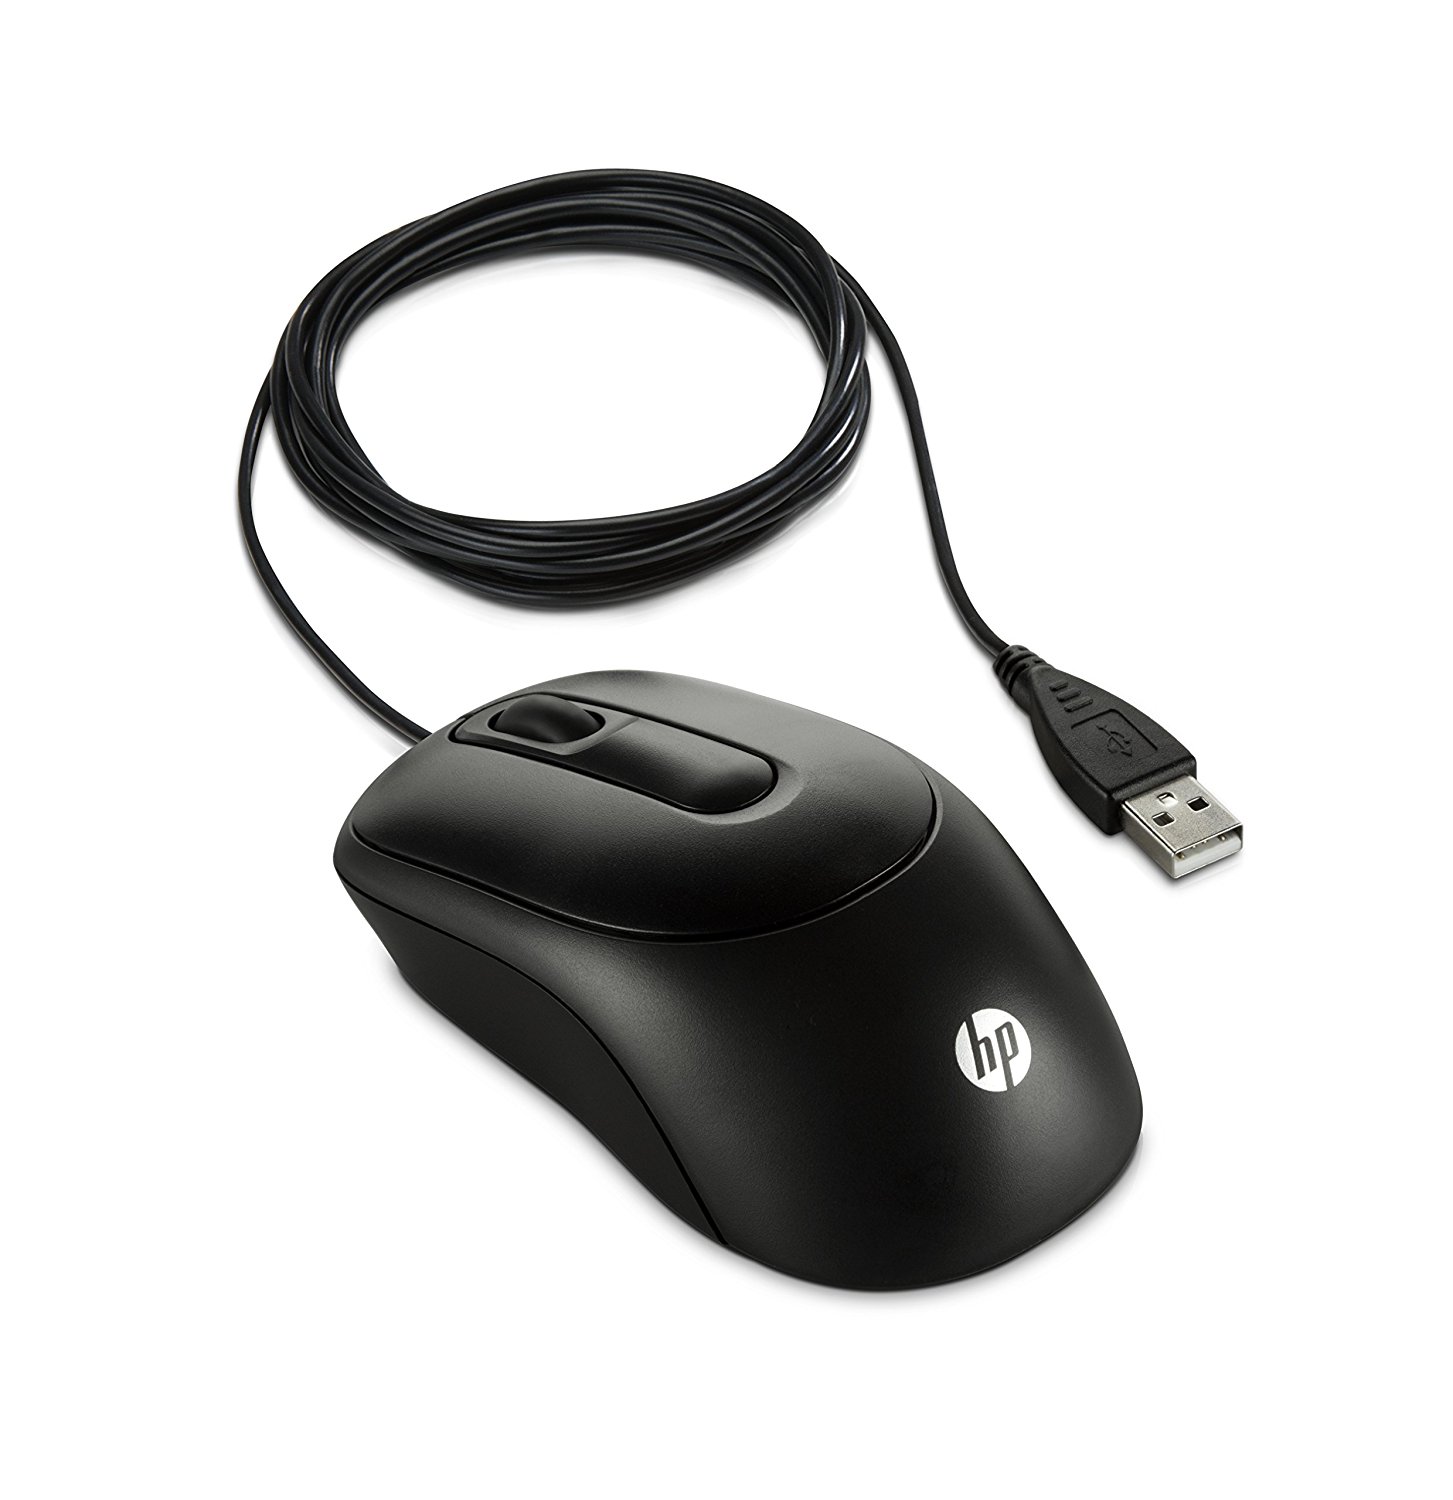 Amazon.in: Buy HP X900 USB Mouse (Black) Online at Low Prices in ...